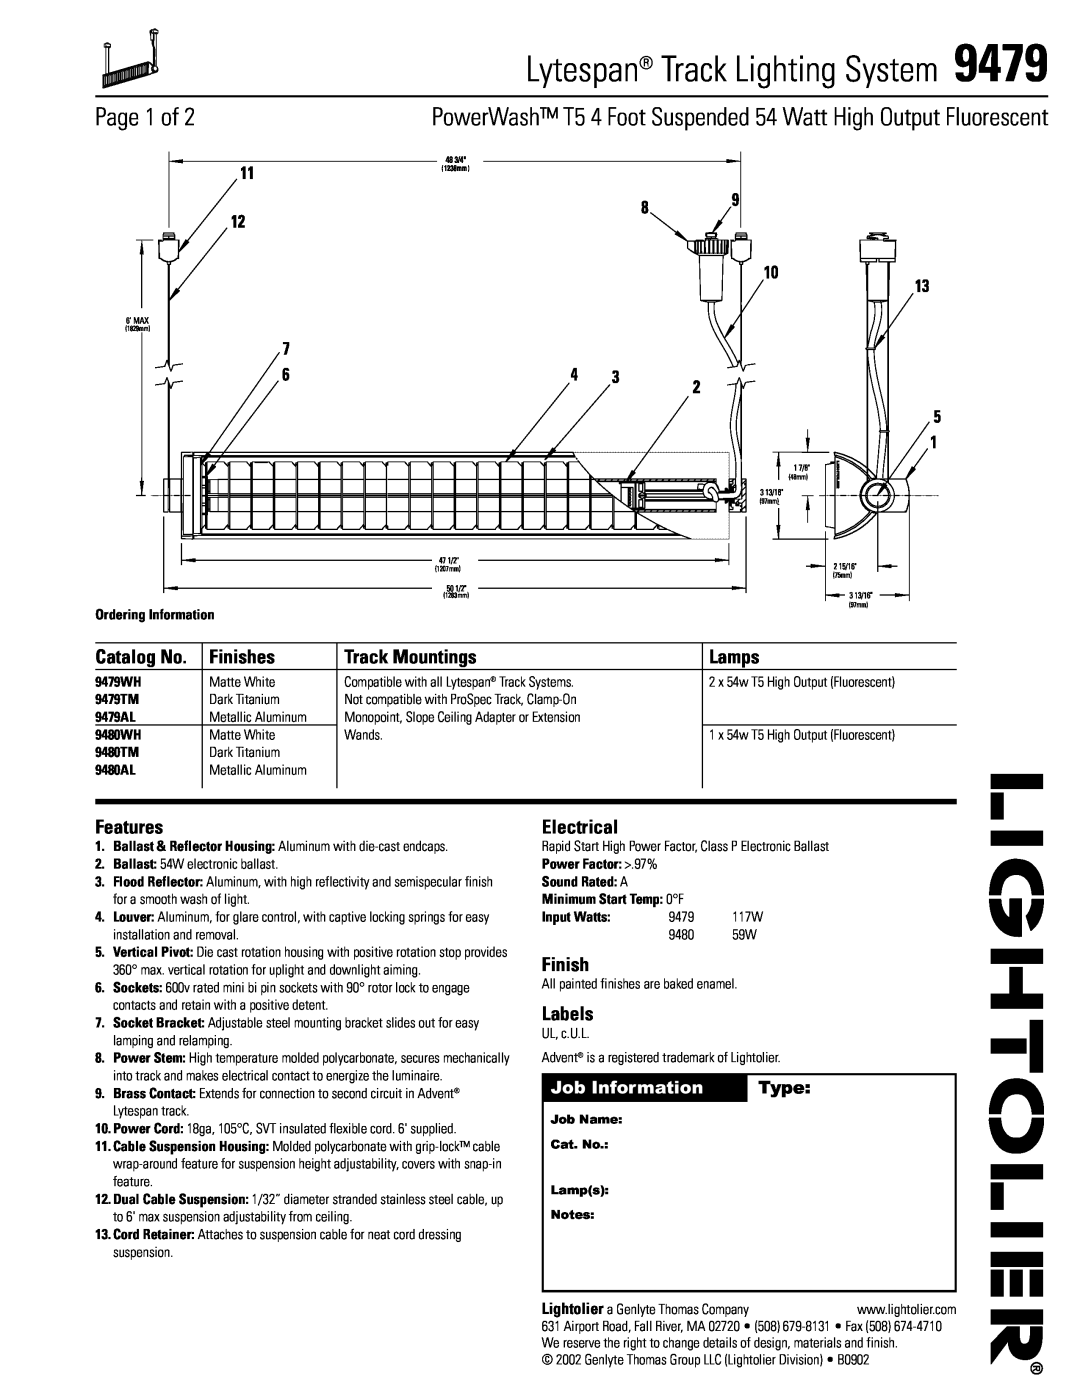 Lightolier 9479 manual Page 1 of, Finishes, Track Mountings, Lamps, Features, Electrical, Labels, Job Information, Type 